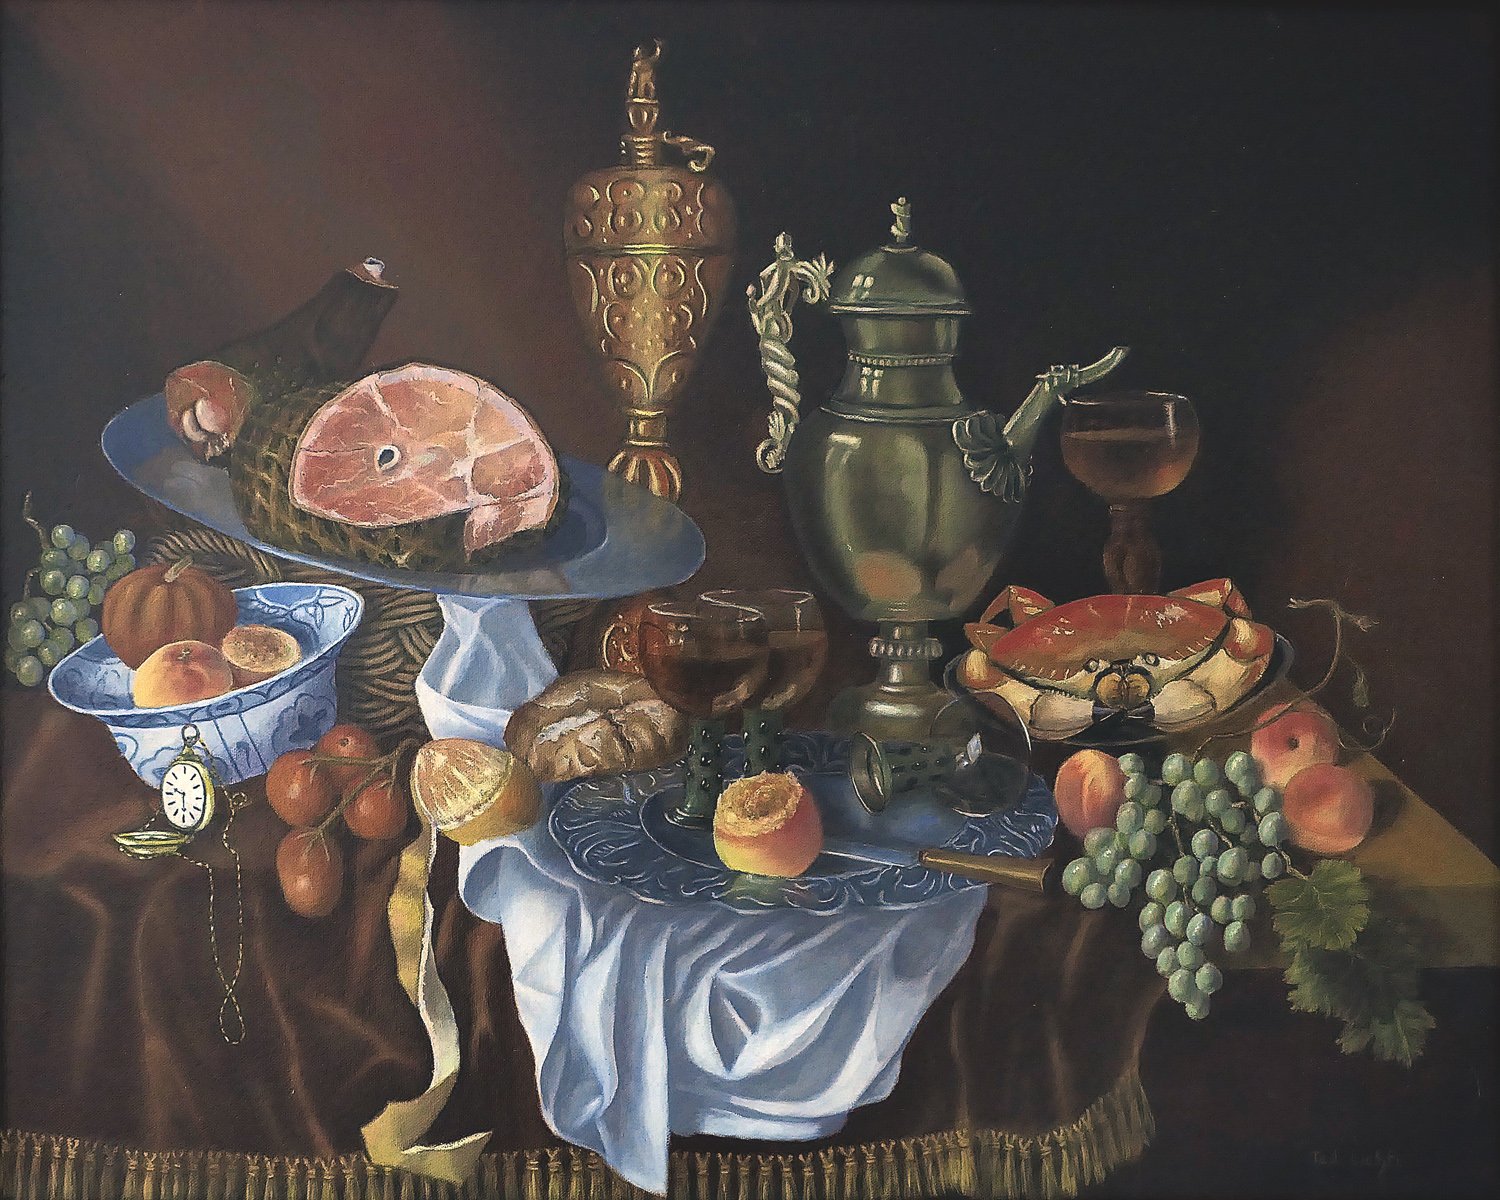 Afternoon Feast, Ted Lichti